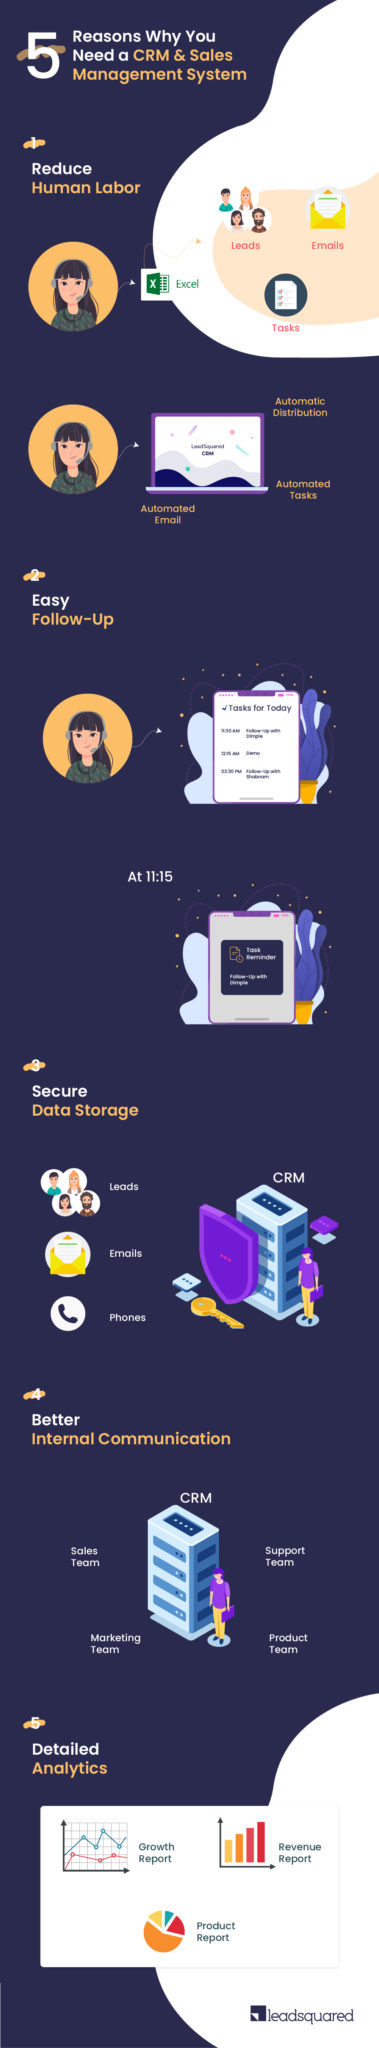 CRM and sales management - infographic